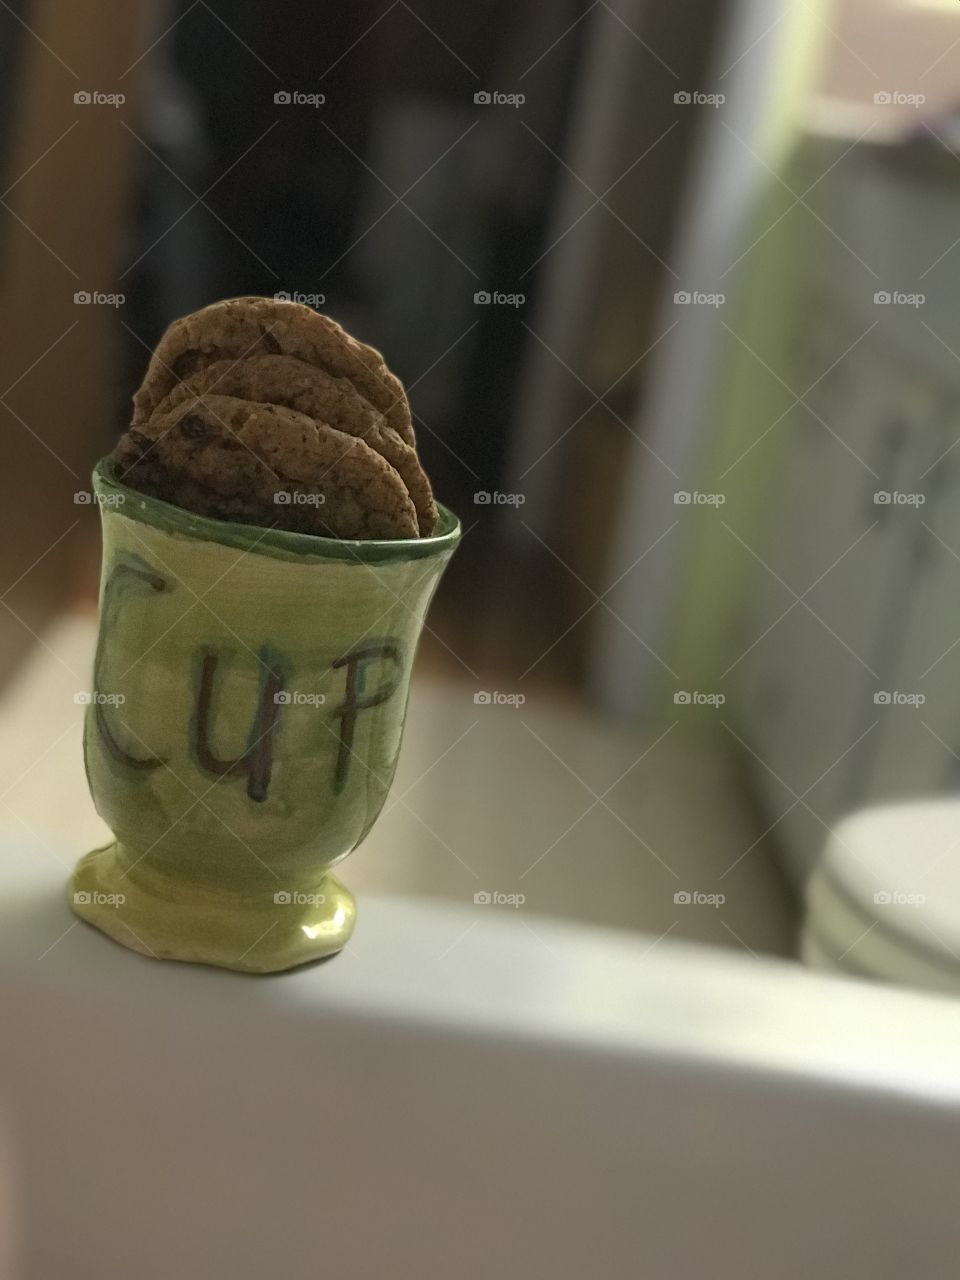 A homemade ‘Cup’ made by one of my darling daughters. Bath time is a favourite of mine - especially with some Earl Grey tea and oatmeal raisin cookies (Alice in Wonderland fans will get the Mad Hatter Tea Party ‘Cup’ reference!)